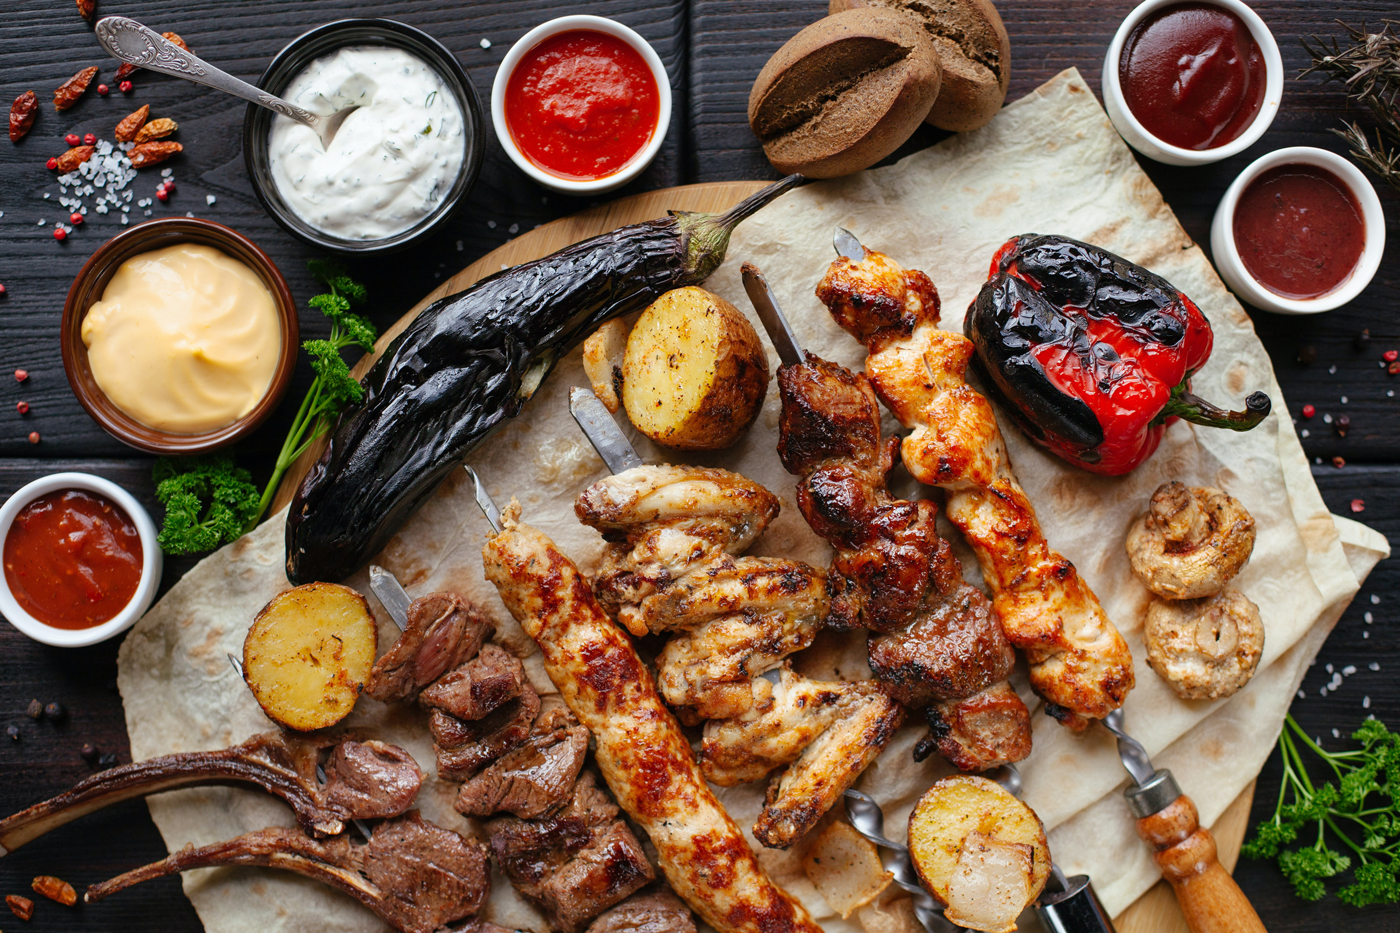 Grilled meats and vegetables on a platter with sauces on the side.